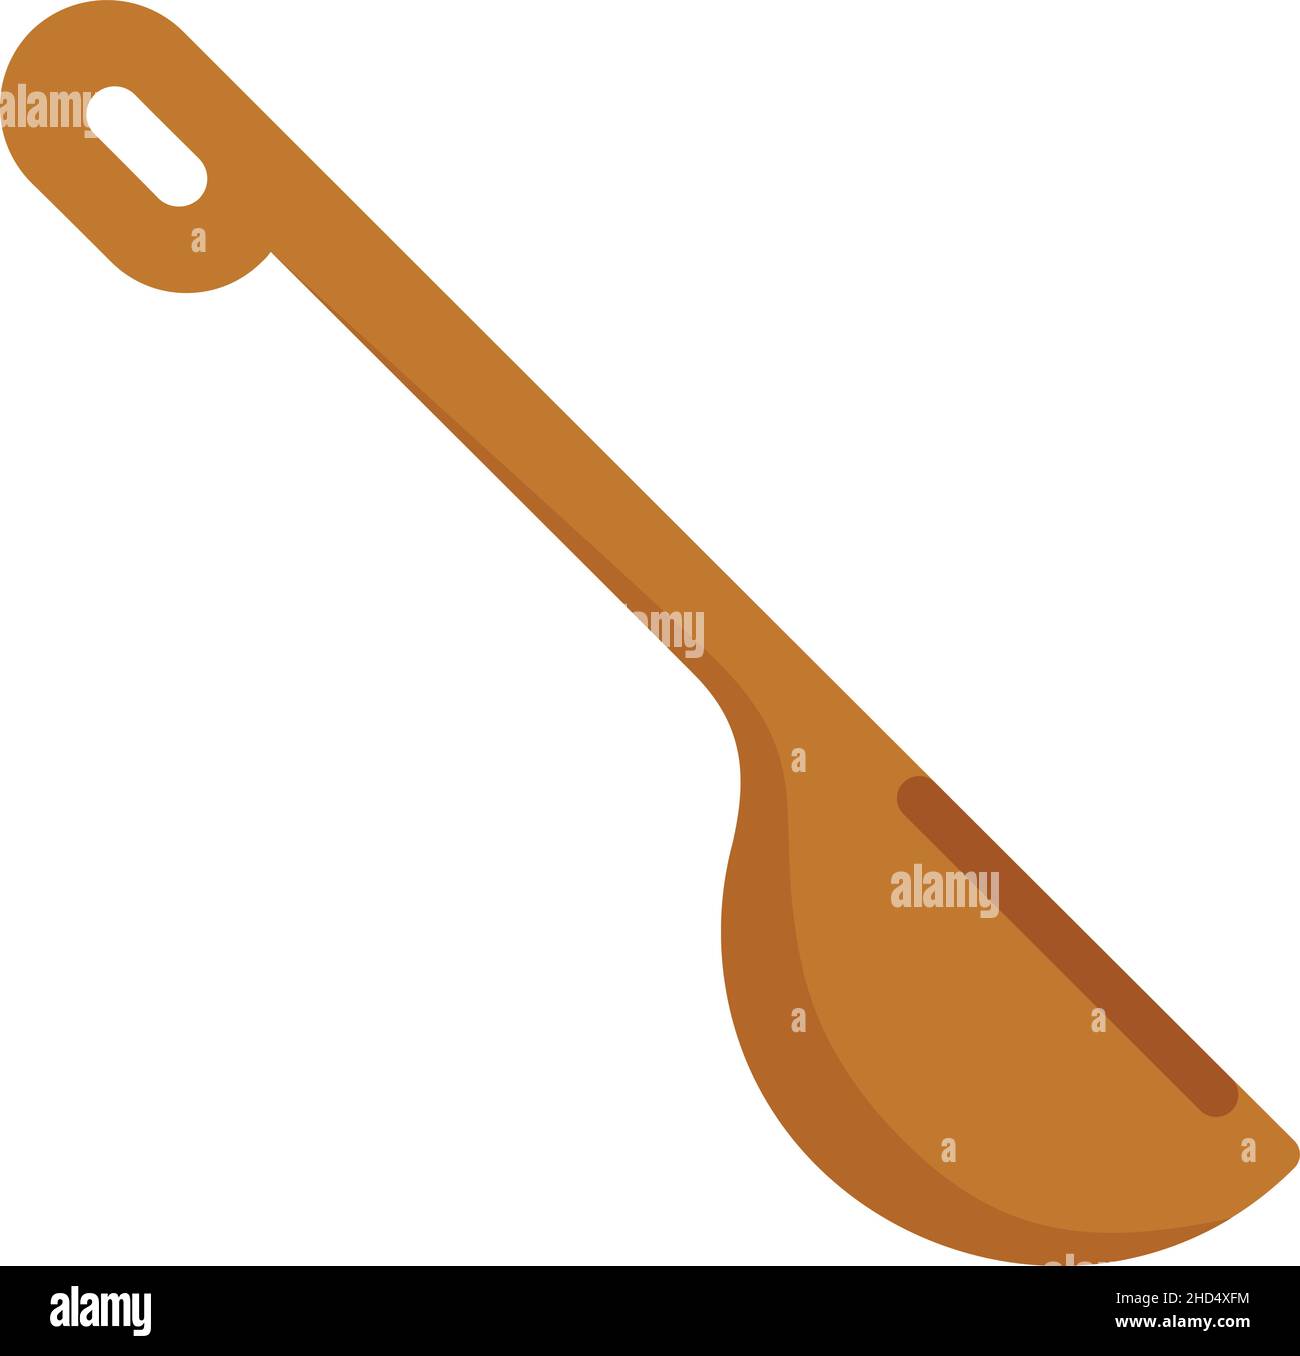 Sauna wood spoon icon. Flat illustration of sauna wood spoon vector icon isolated on white background Stock Vector